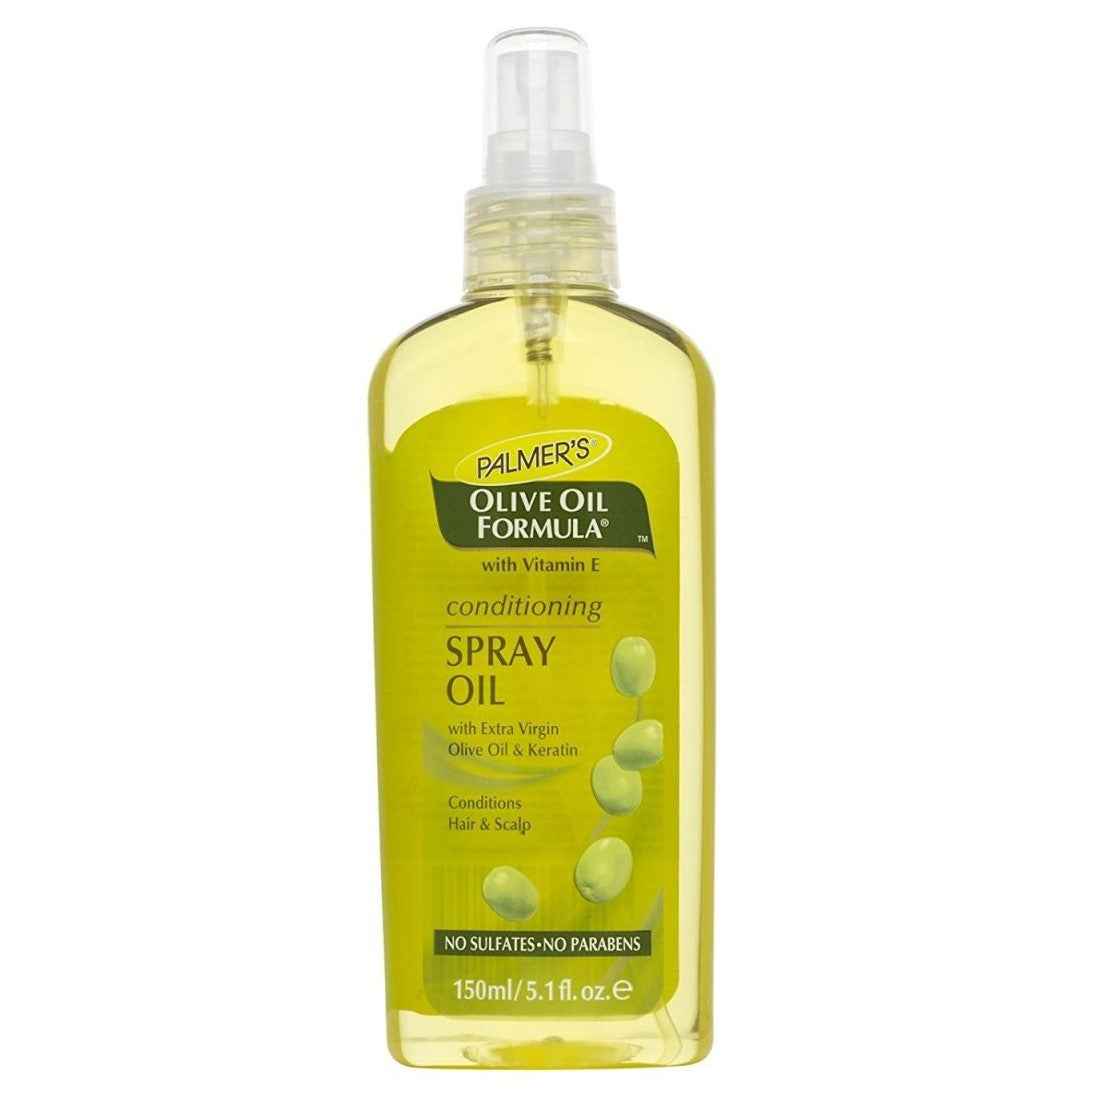 Palmers Olive Oil Formula Conditioning Spray 150ml